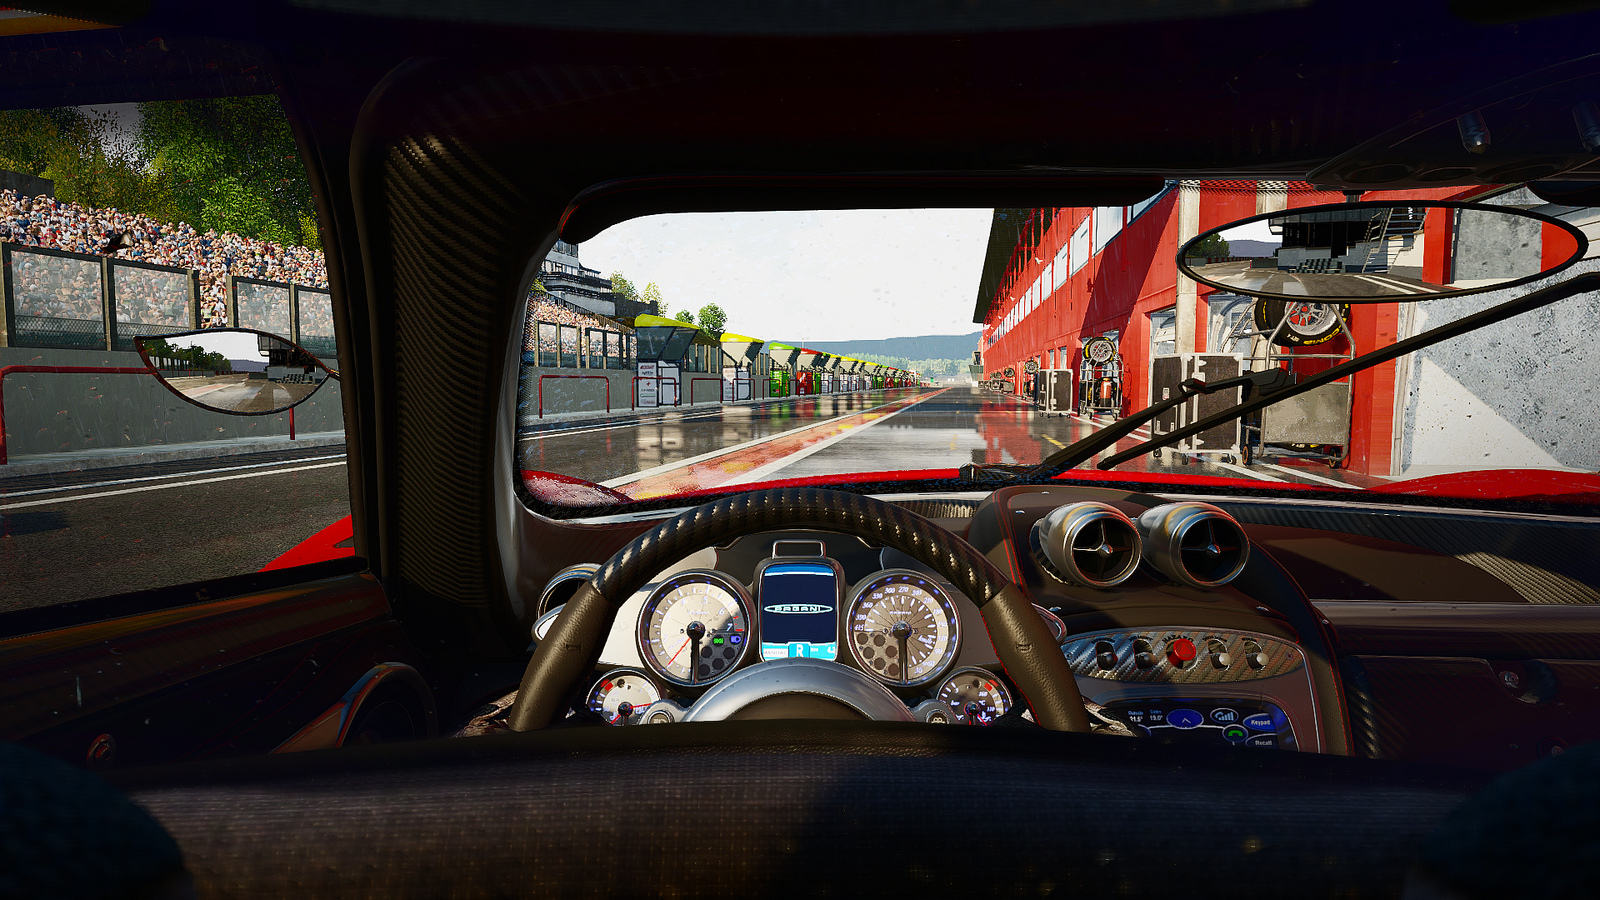 Cars 4 игра. Project cars 1. Проджект карс 4. Project cars Скриншоты. Project cars 2 кабина.